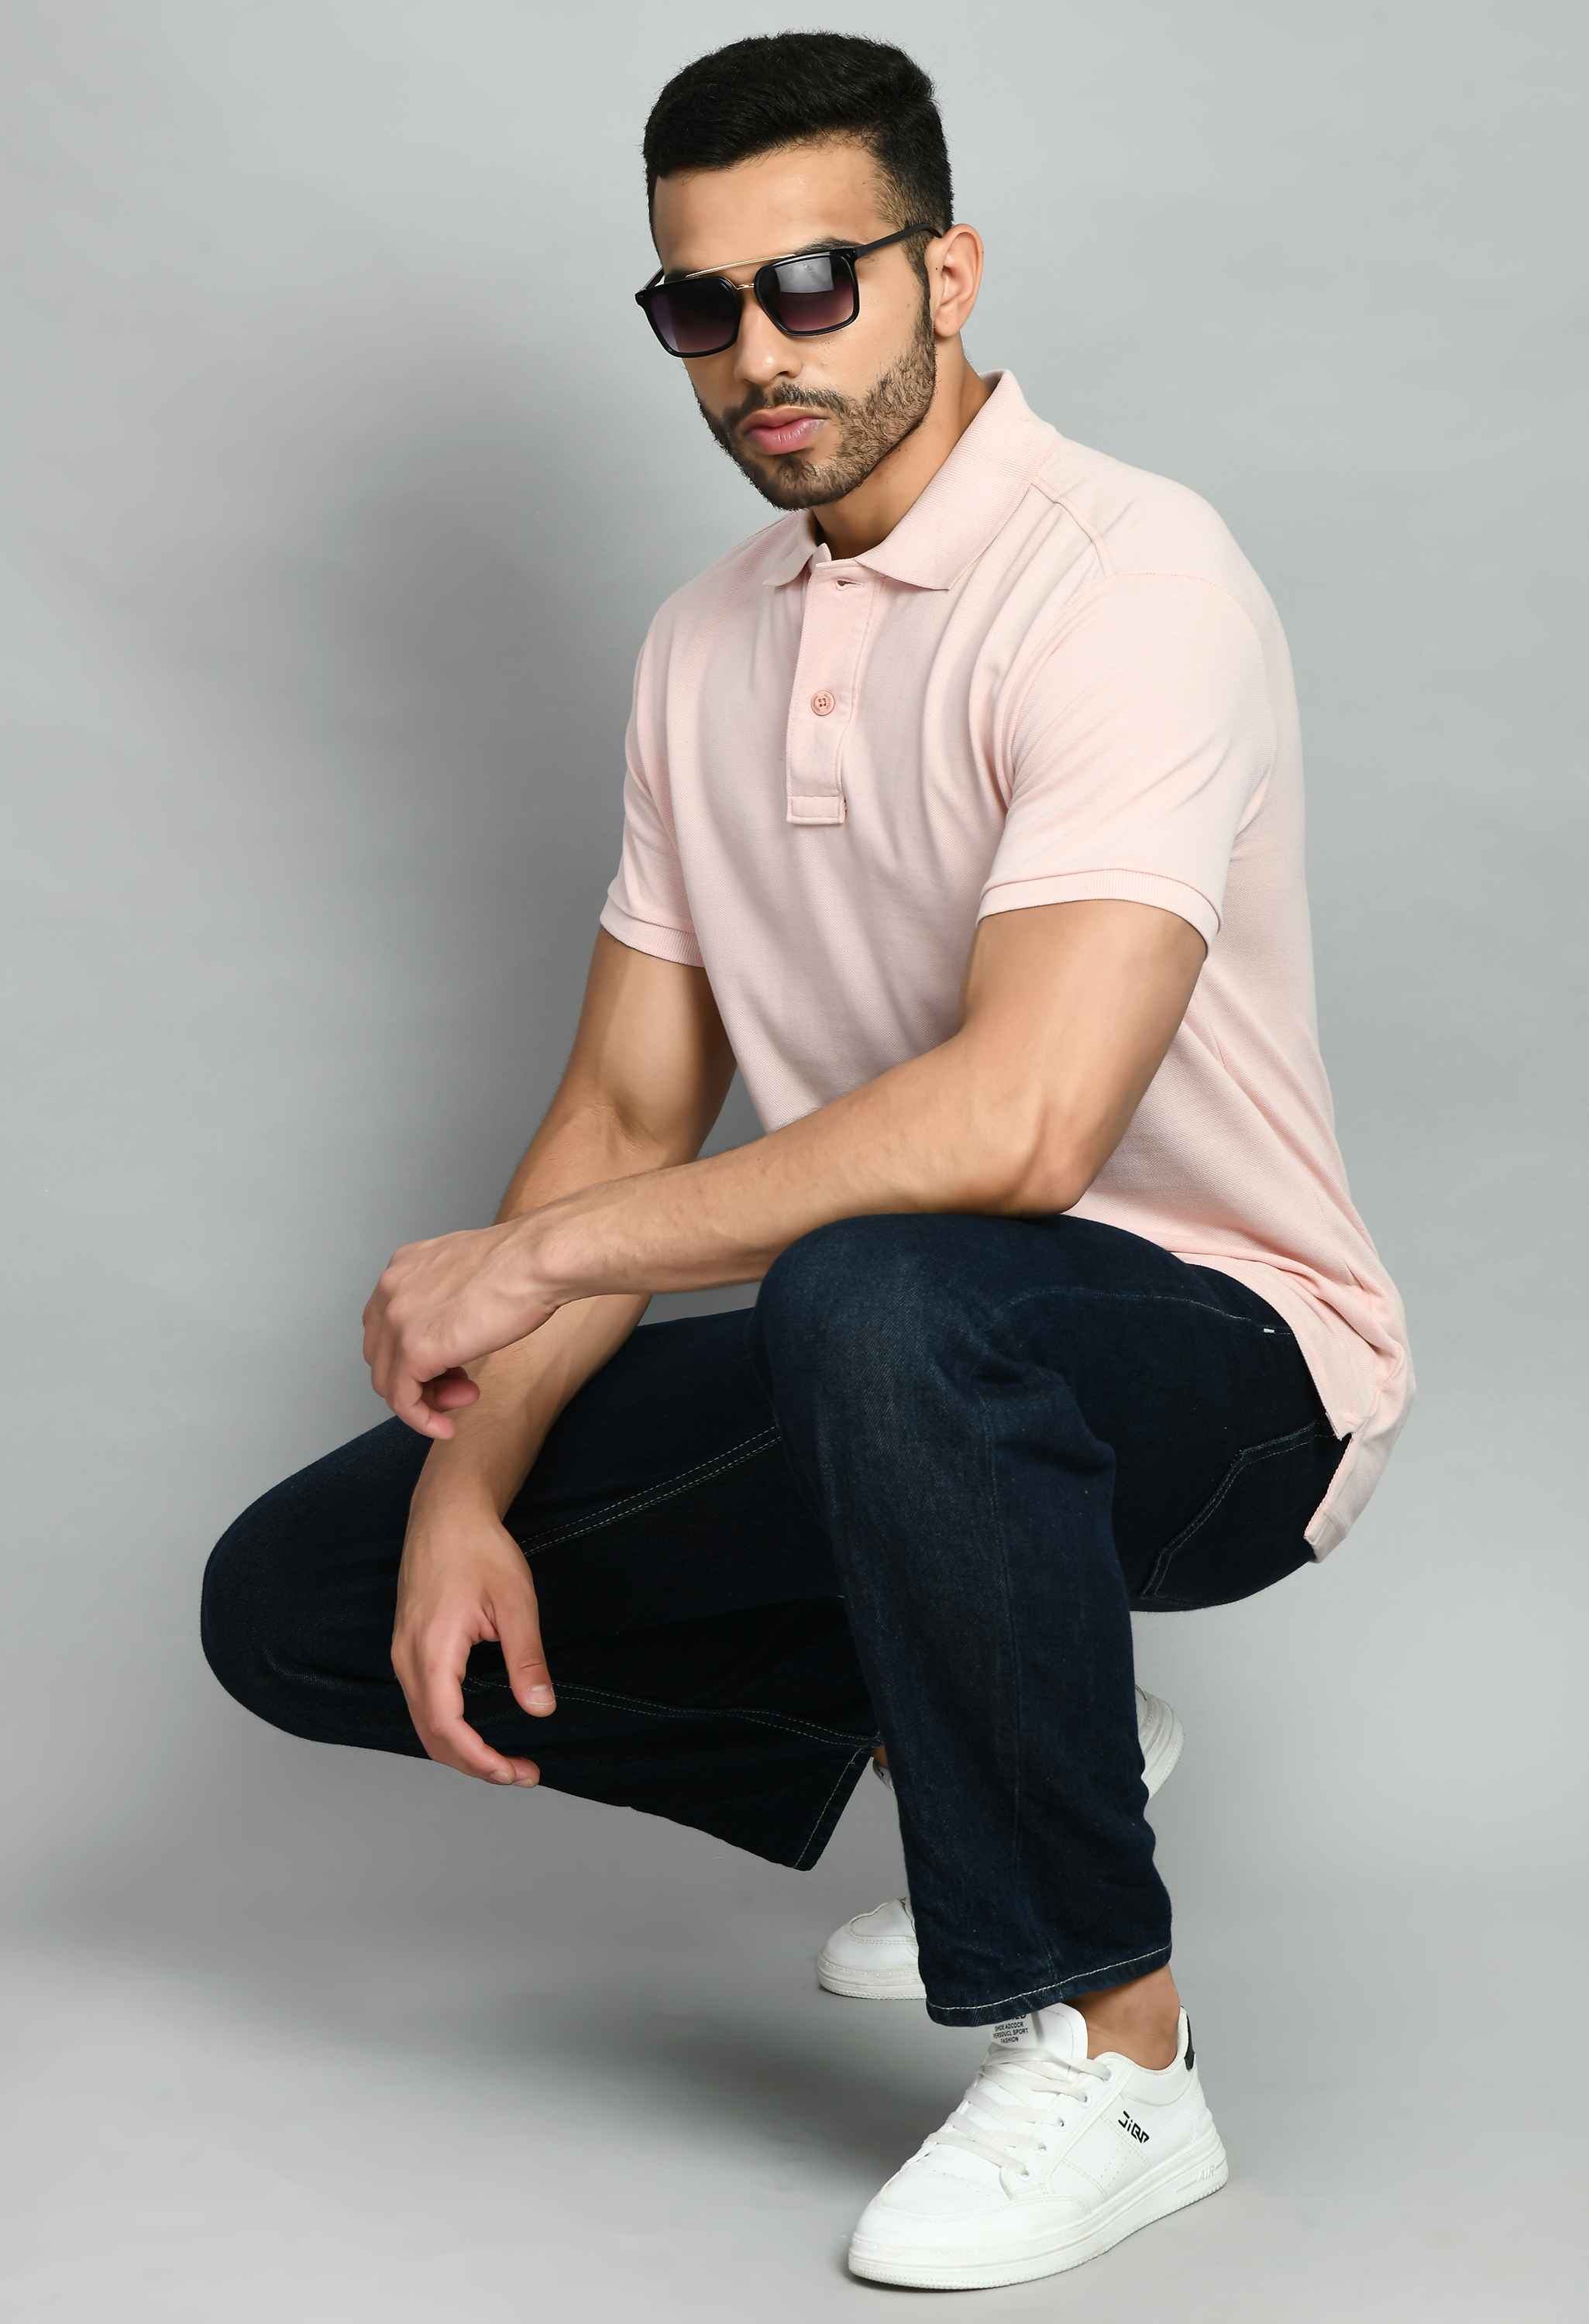 Men's Solid Smart Fit Polo T-Shirt - SQUIREHOOD